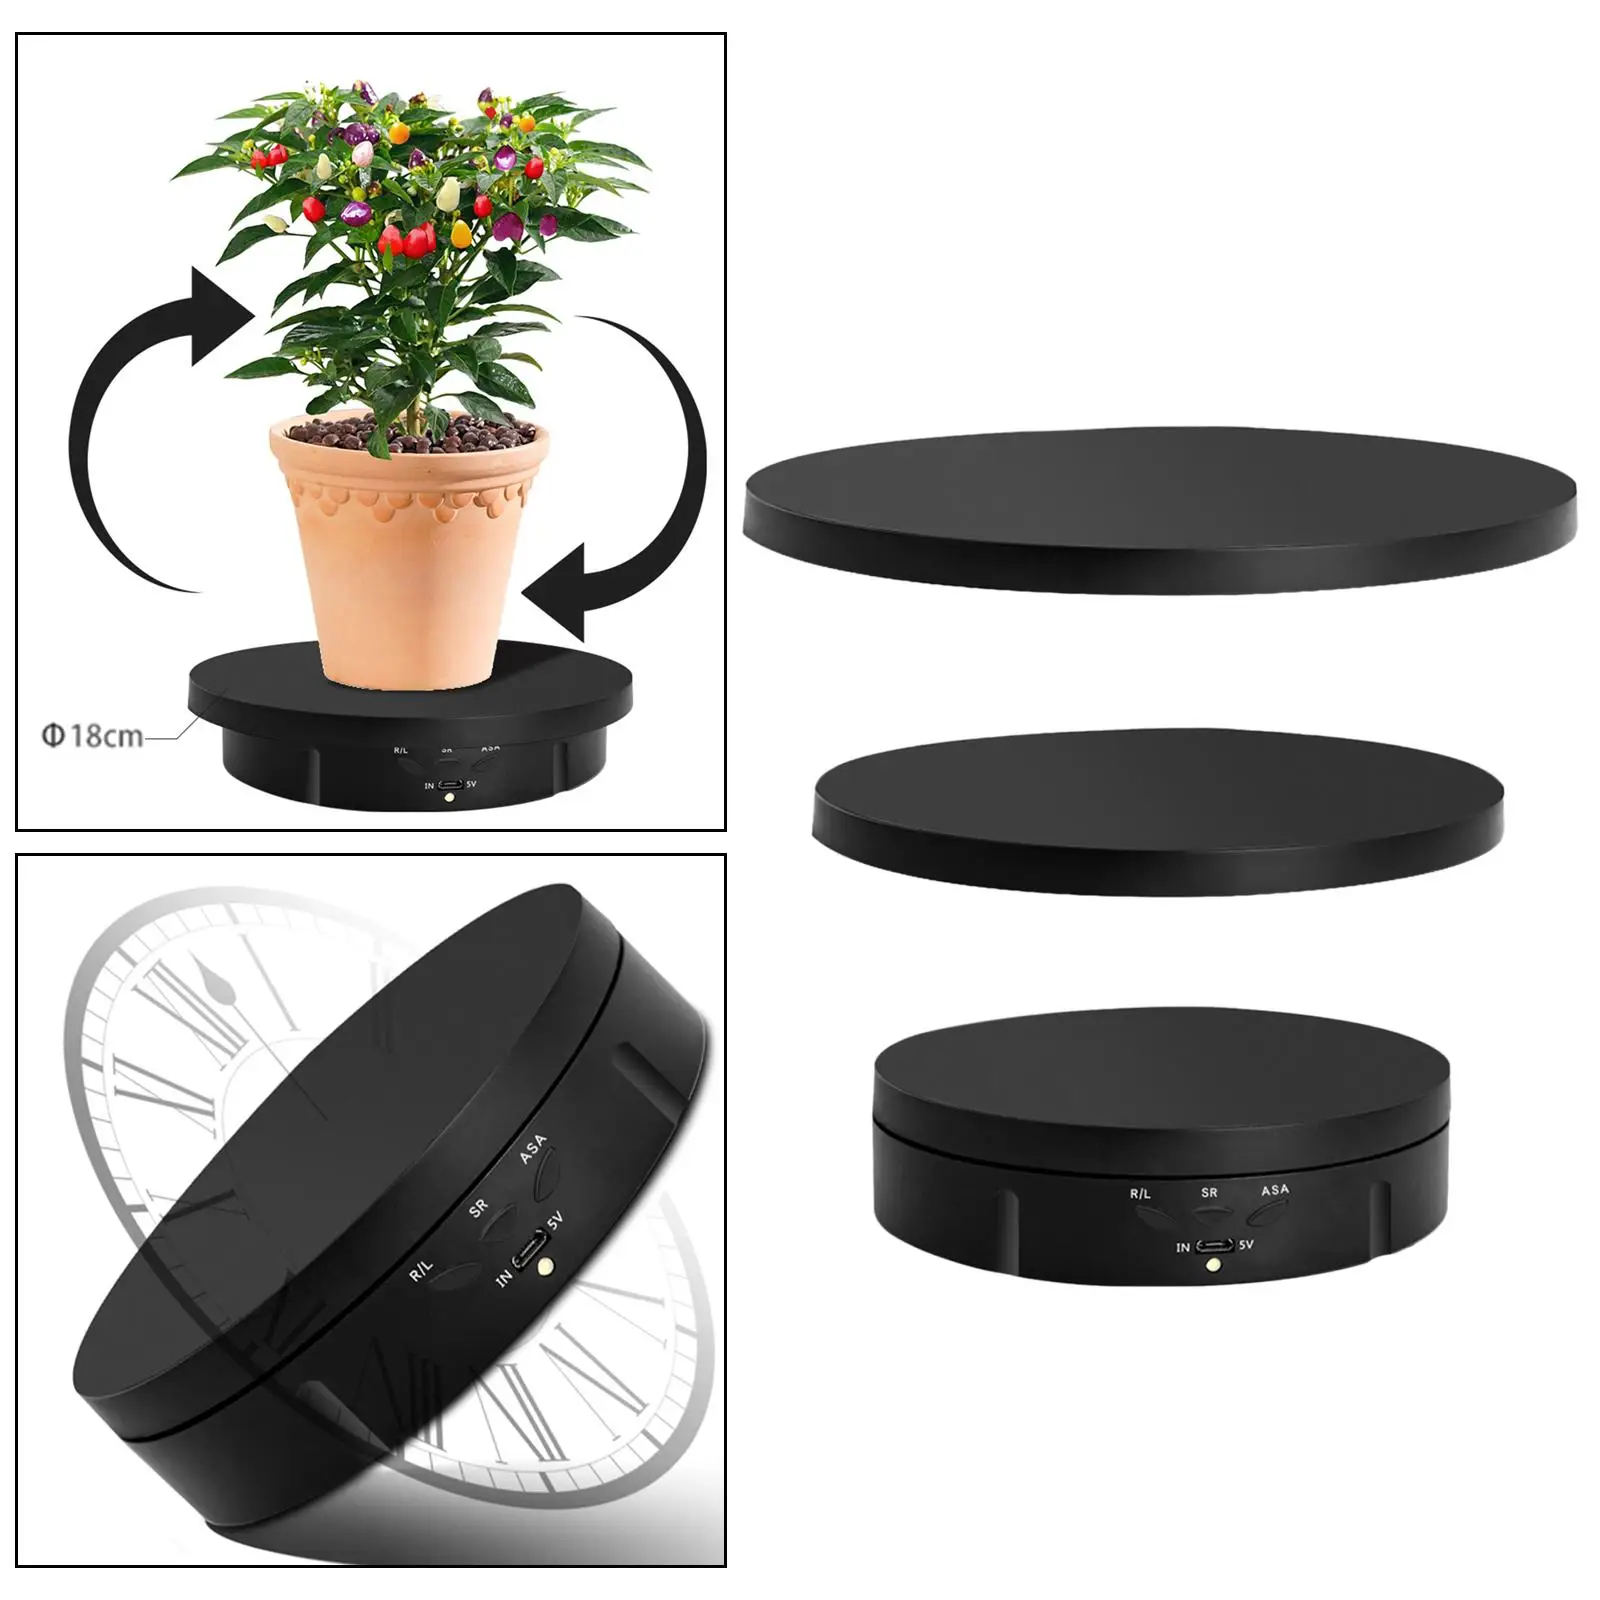 Electric Rotating Product Display Stand Turntable Mute Jewelry Watch Holder for Jewelry Photography Products Shows Models Watch